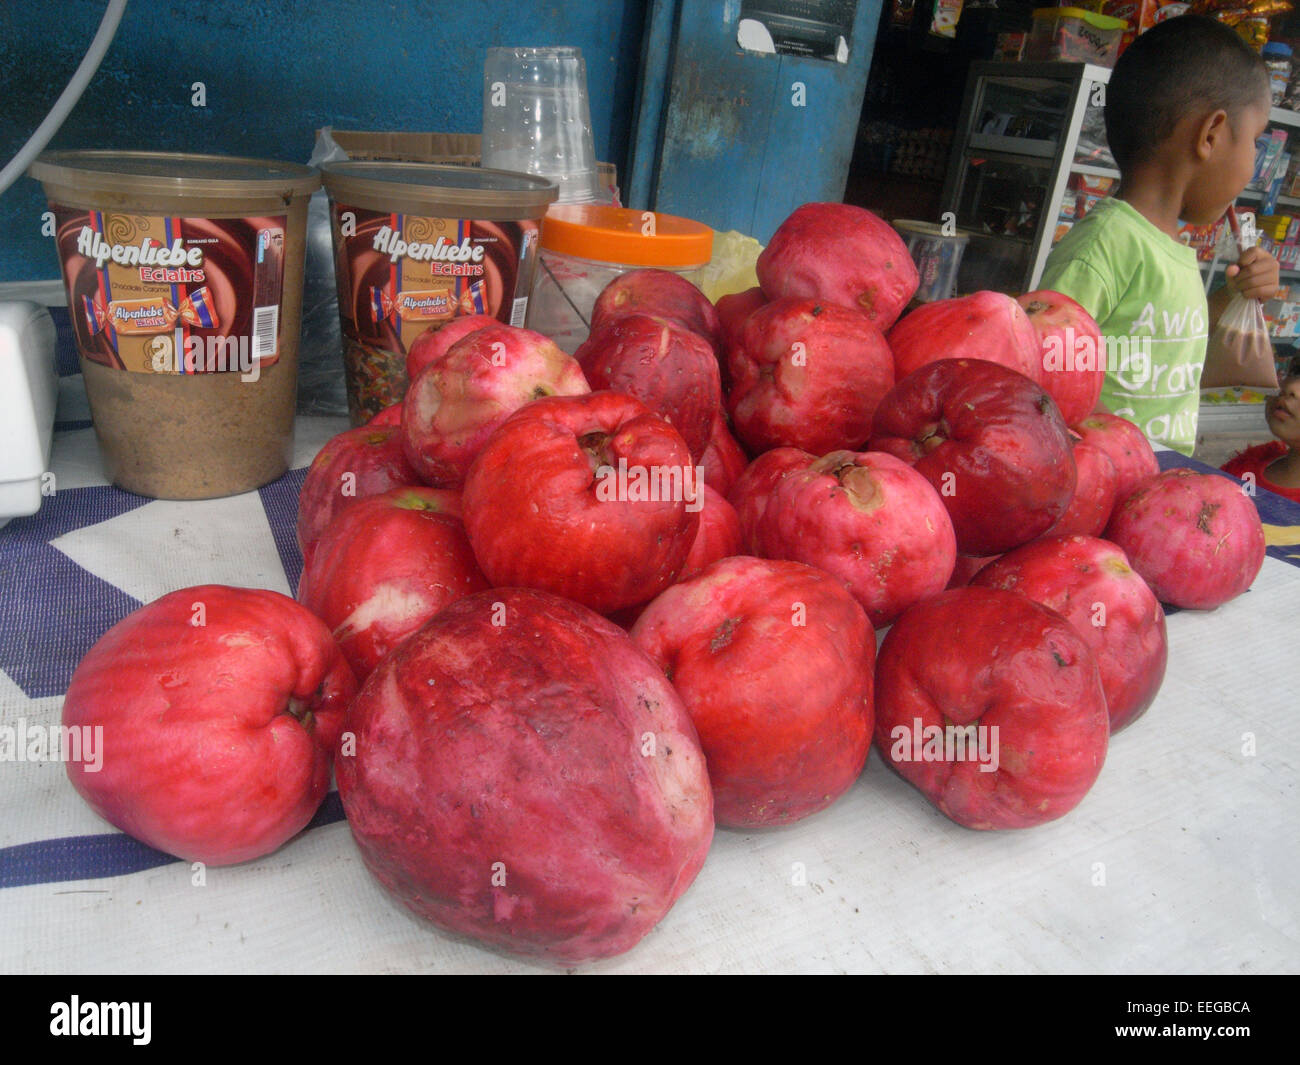 Enormous Syzygium fruits (local name 'jambo') for sale at stall in Sorong, Papua province, Indonesia. No MR or PR Stock Photo